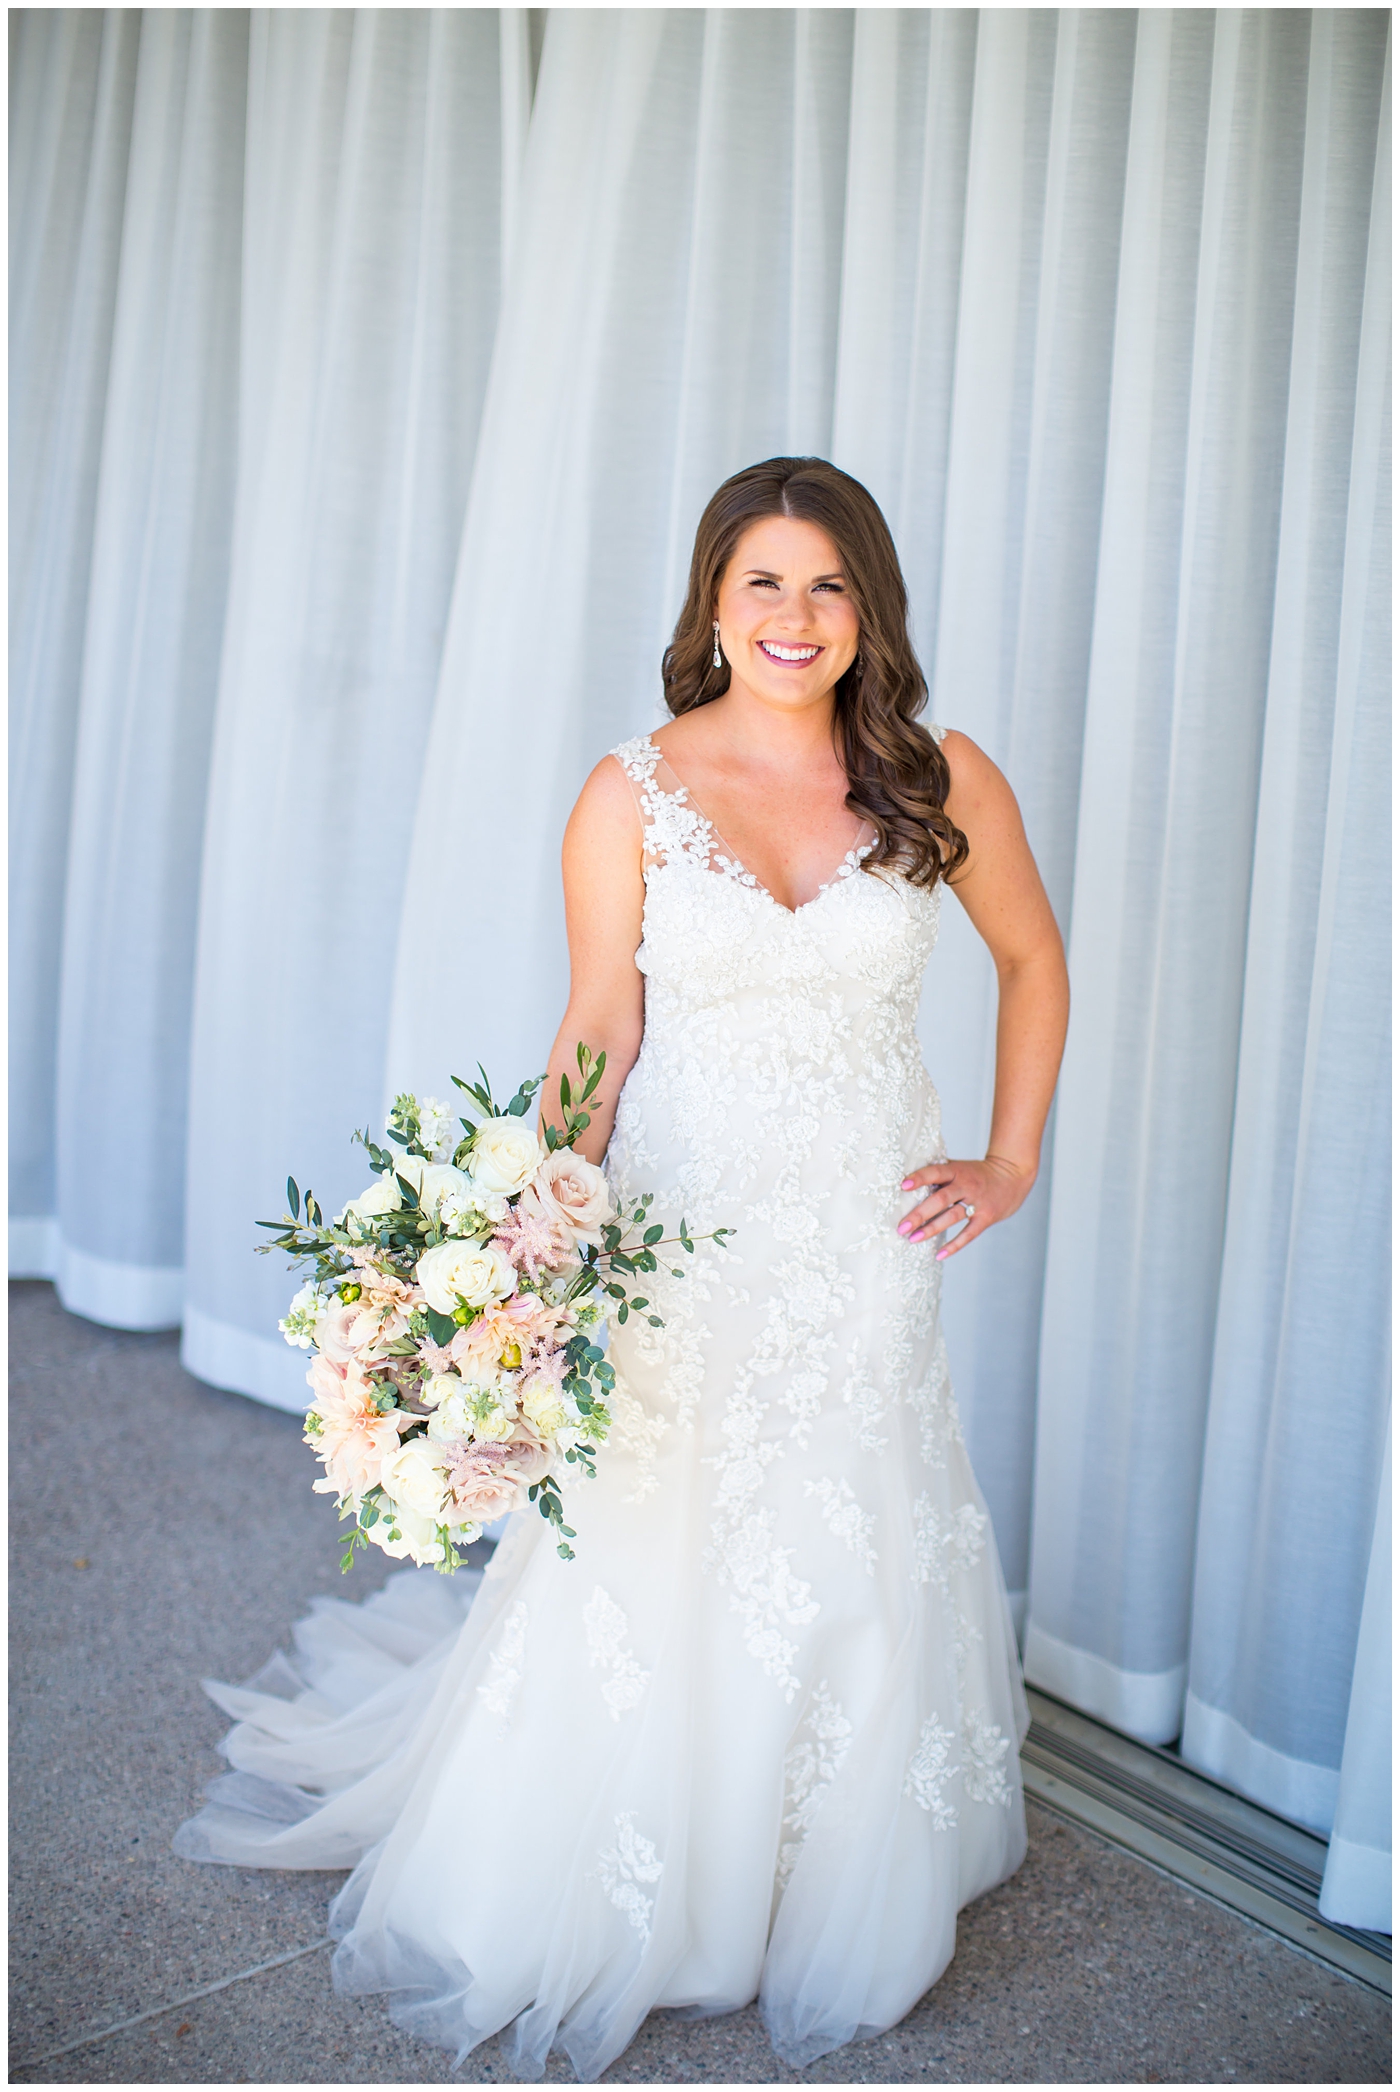 bride in wtoo watters wedding dress with lace straps with wildflower bridal bouquet with soft pink, blush, white, greenery flowers including roses, dahlias, snapdragons bridal portrait on wedding day